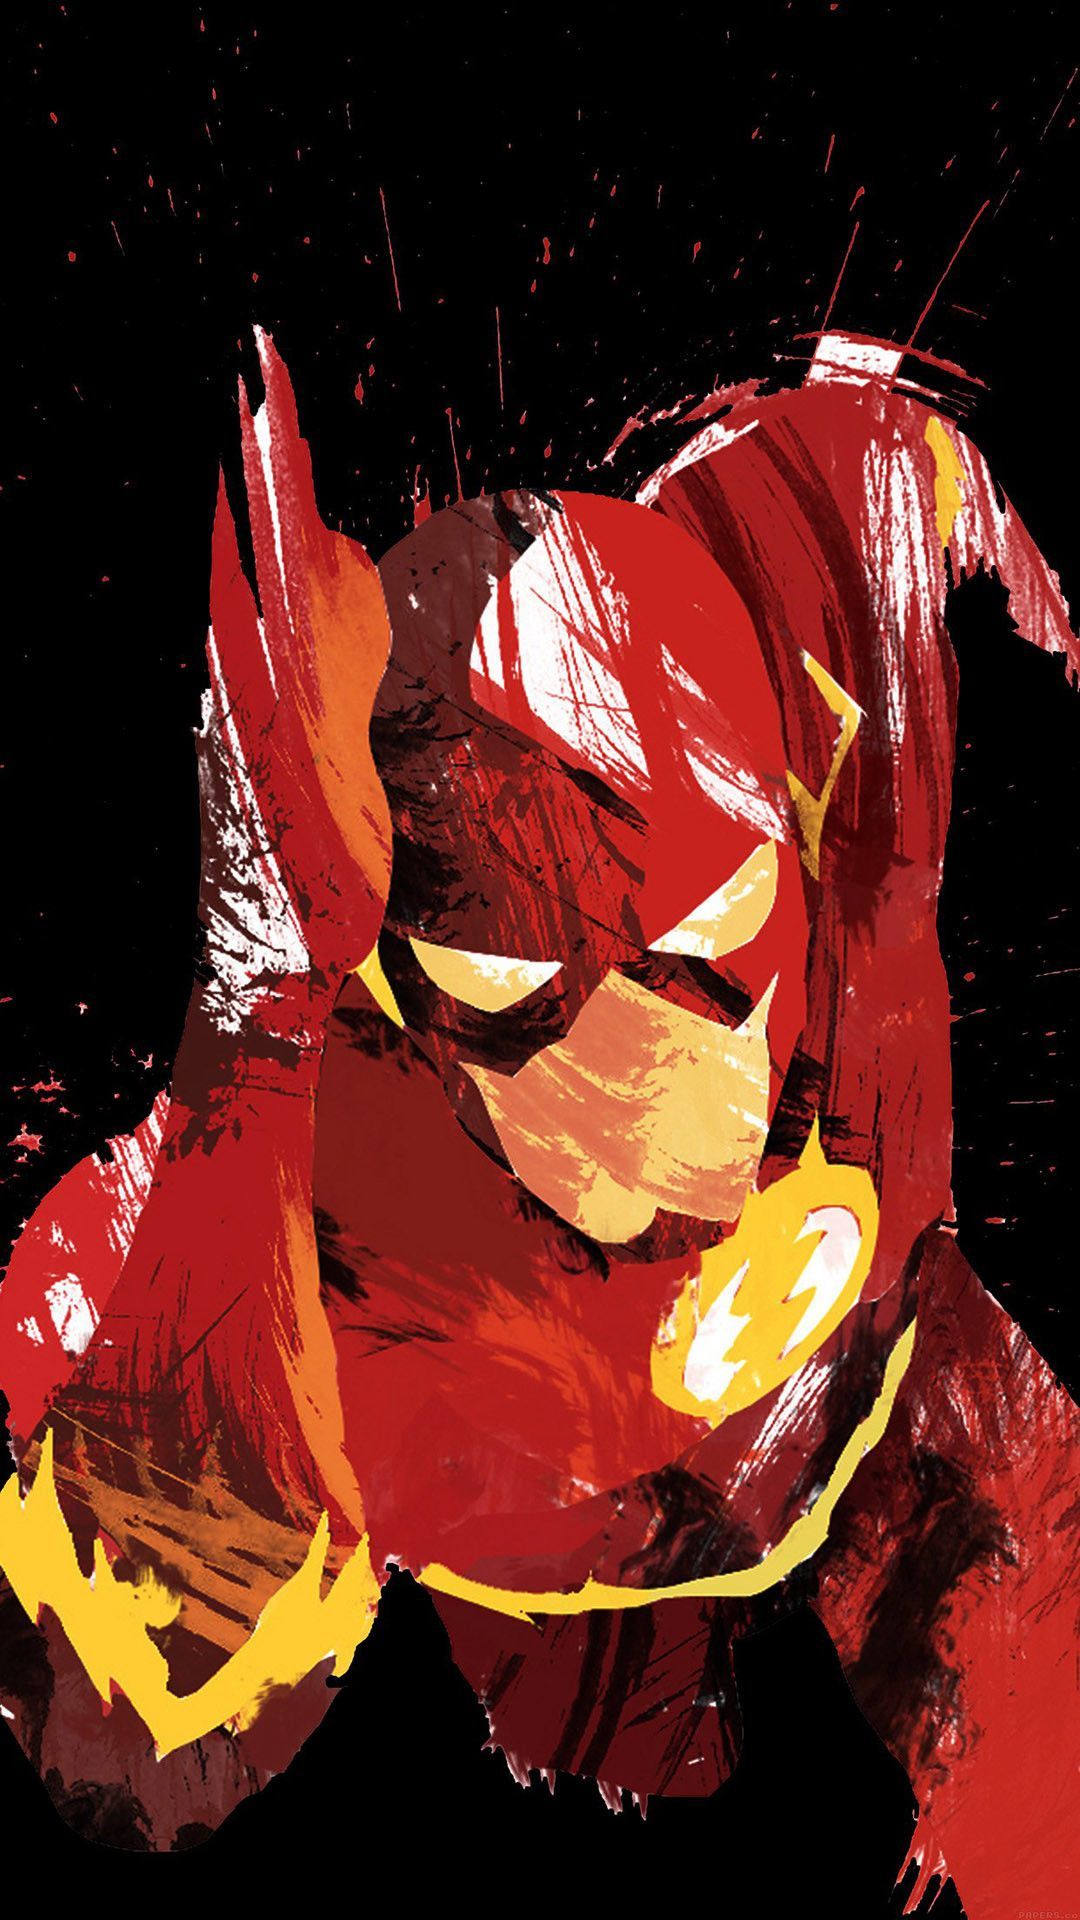 The Flash iPhone Wallpaper Free The Flash iPhone Background